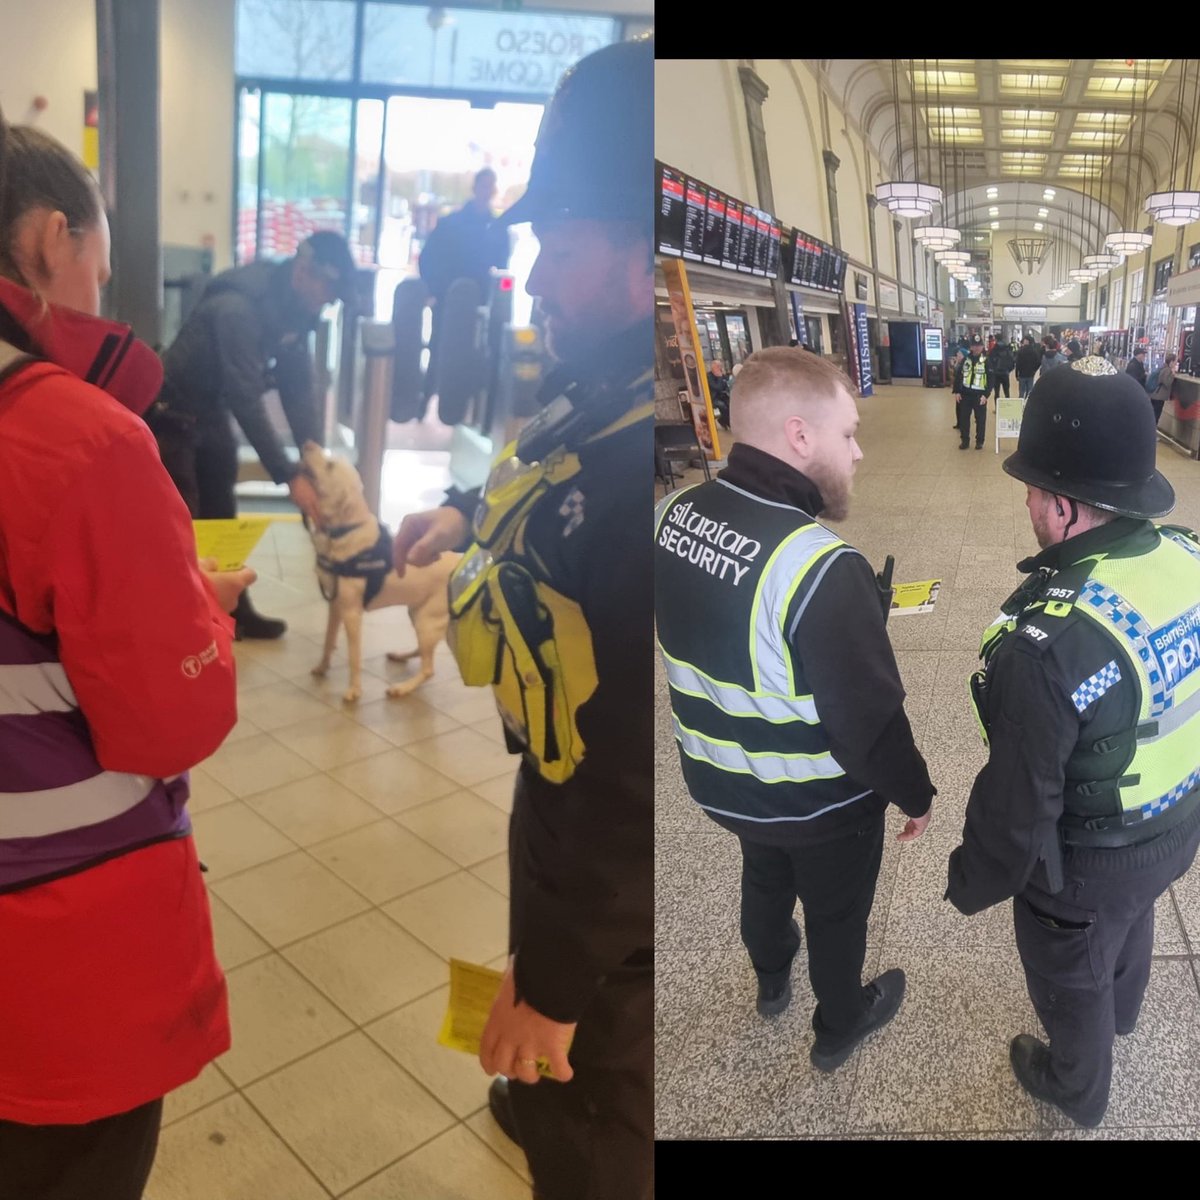 We have been conducting #ProjectServator deployments in and around @tfwrail #Cardiff 🚄

Thanks for chatting with us 👋
Lots of extra 👀 and👂enhancing our vigilance on the network!

Report anything suspicious.

📞 0800 40 50 40
#TextBTP on 📲 61016
Or in an emergency 📞 9️⃣9️⃣9️⃣